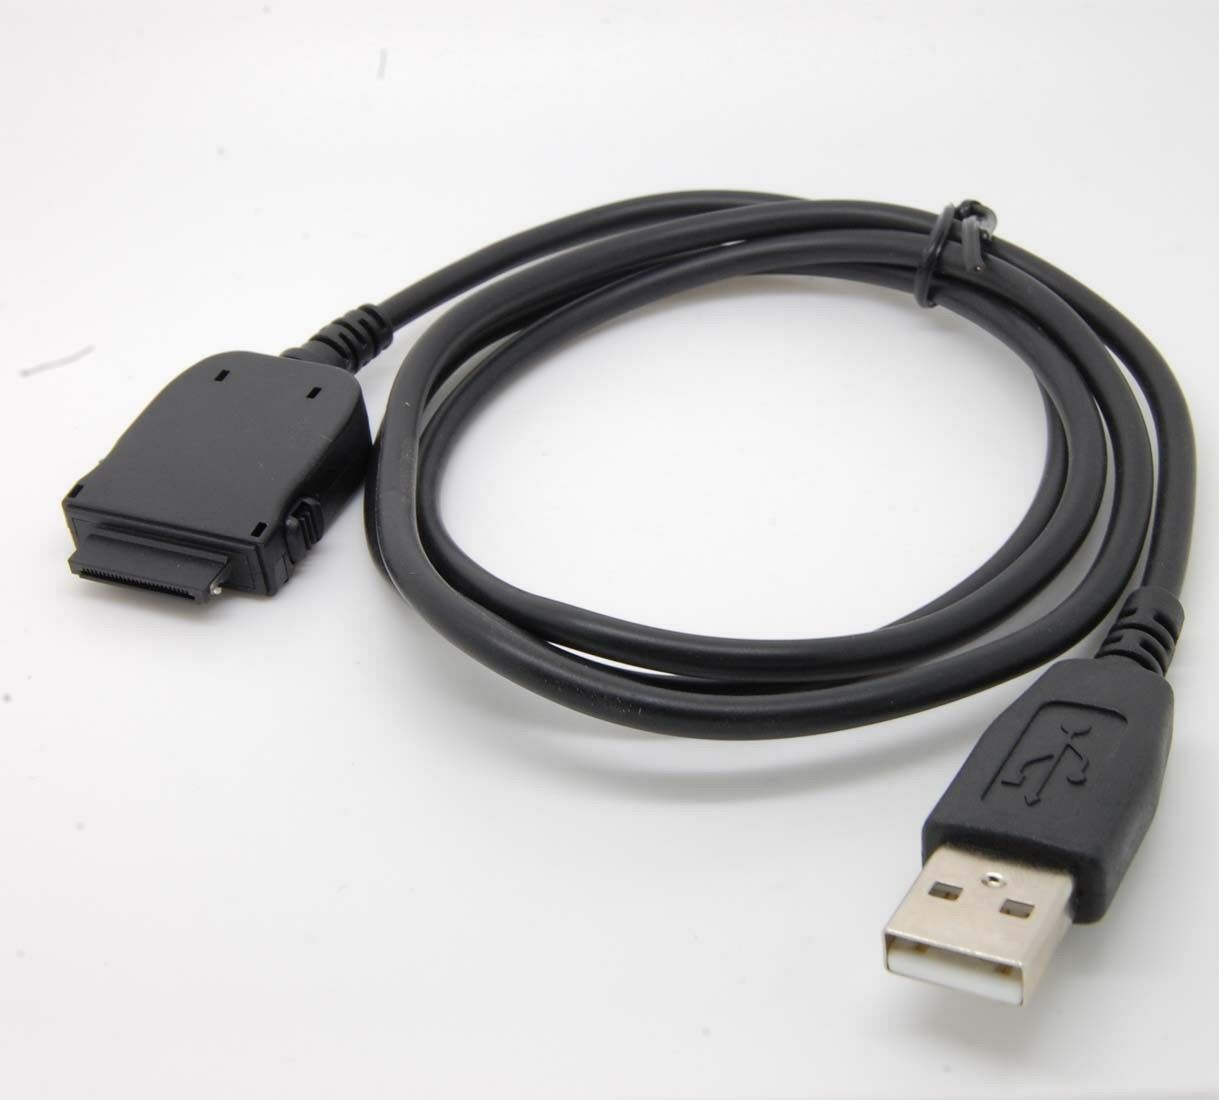 2 In 1 USB Data Sync and Charging CABLE HP COMPAQ IPaq series